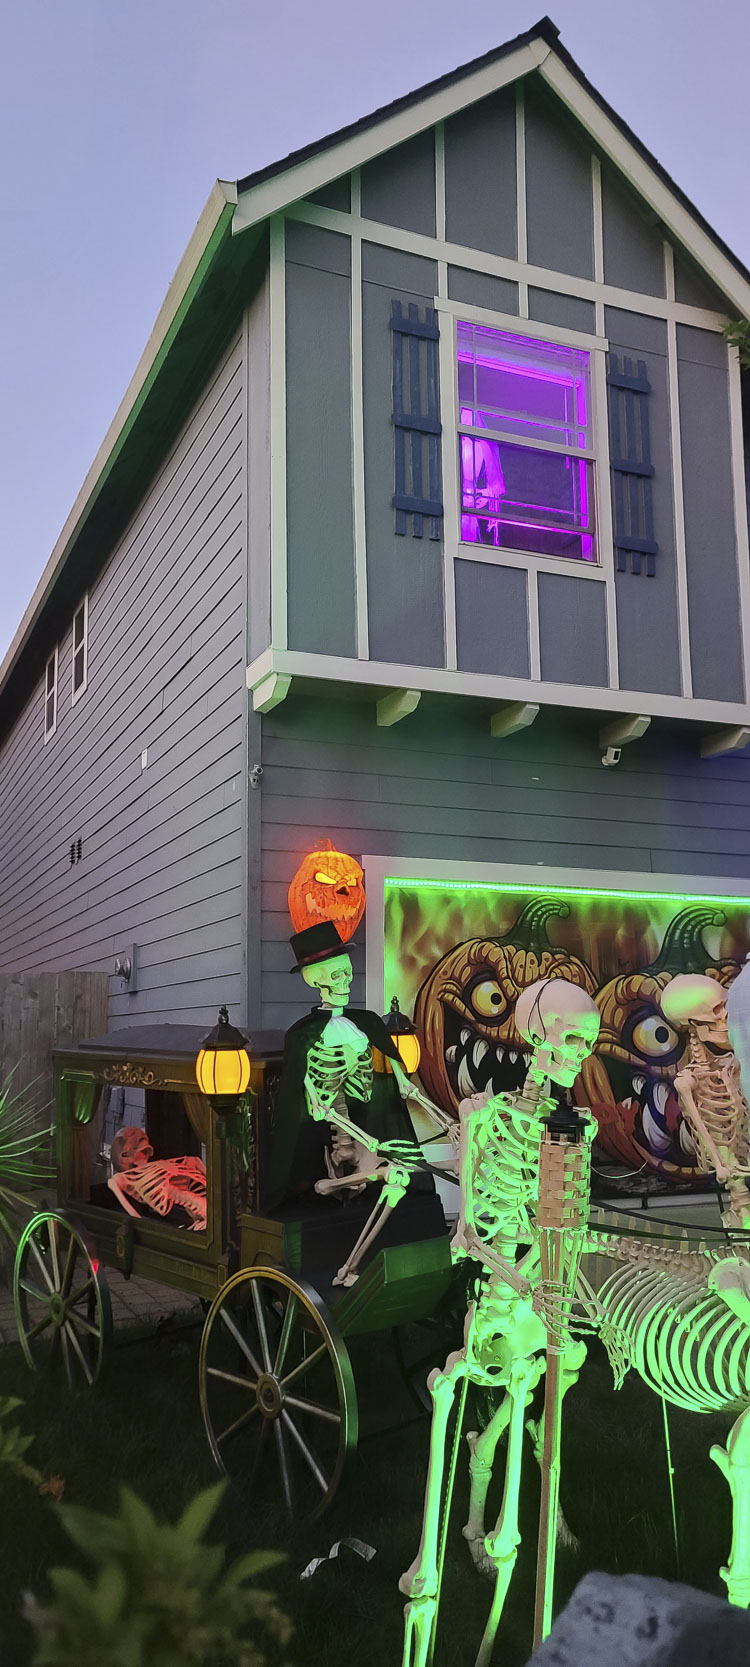 There are plenty of skeletons at Bendyland. That’s appropriate because the homeowners raise money for Skeletons for St. Jude. Photo by Paul Valencia